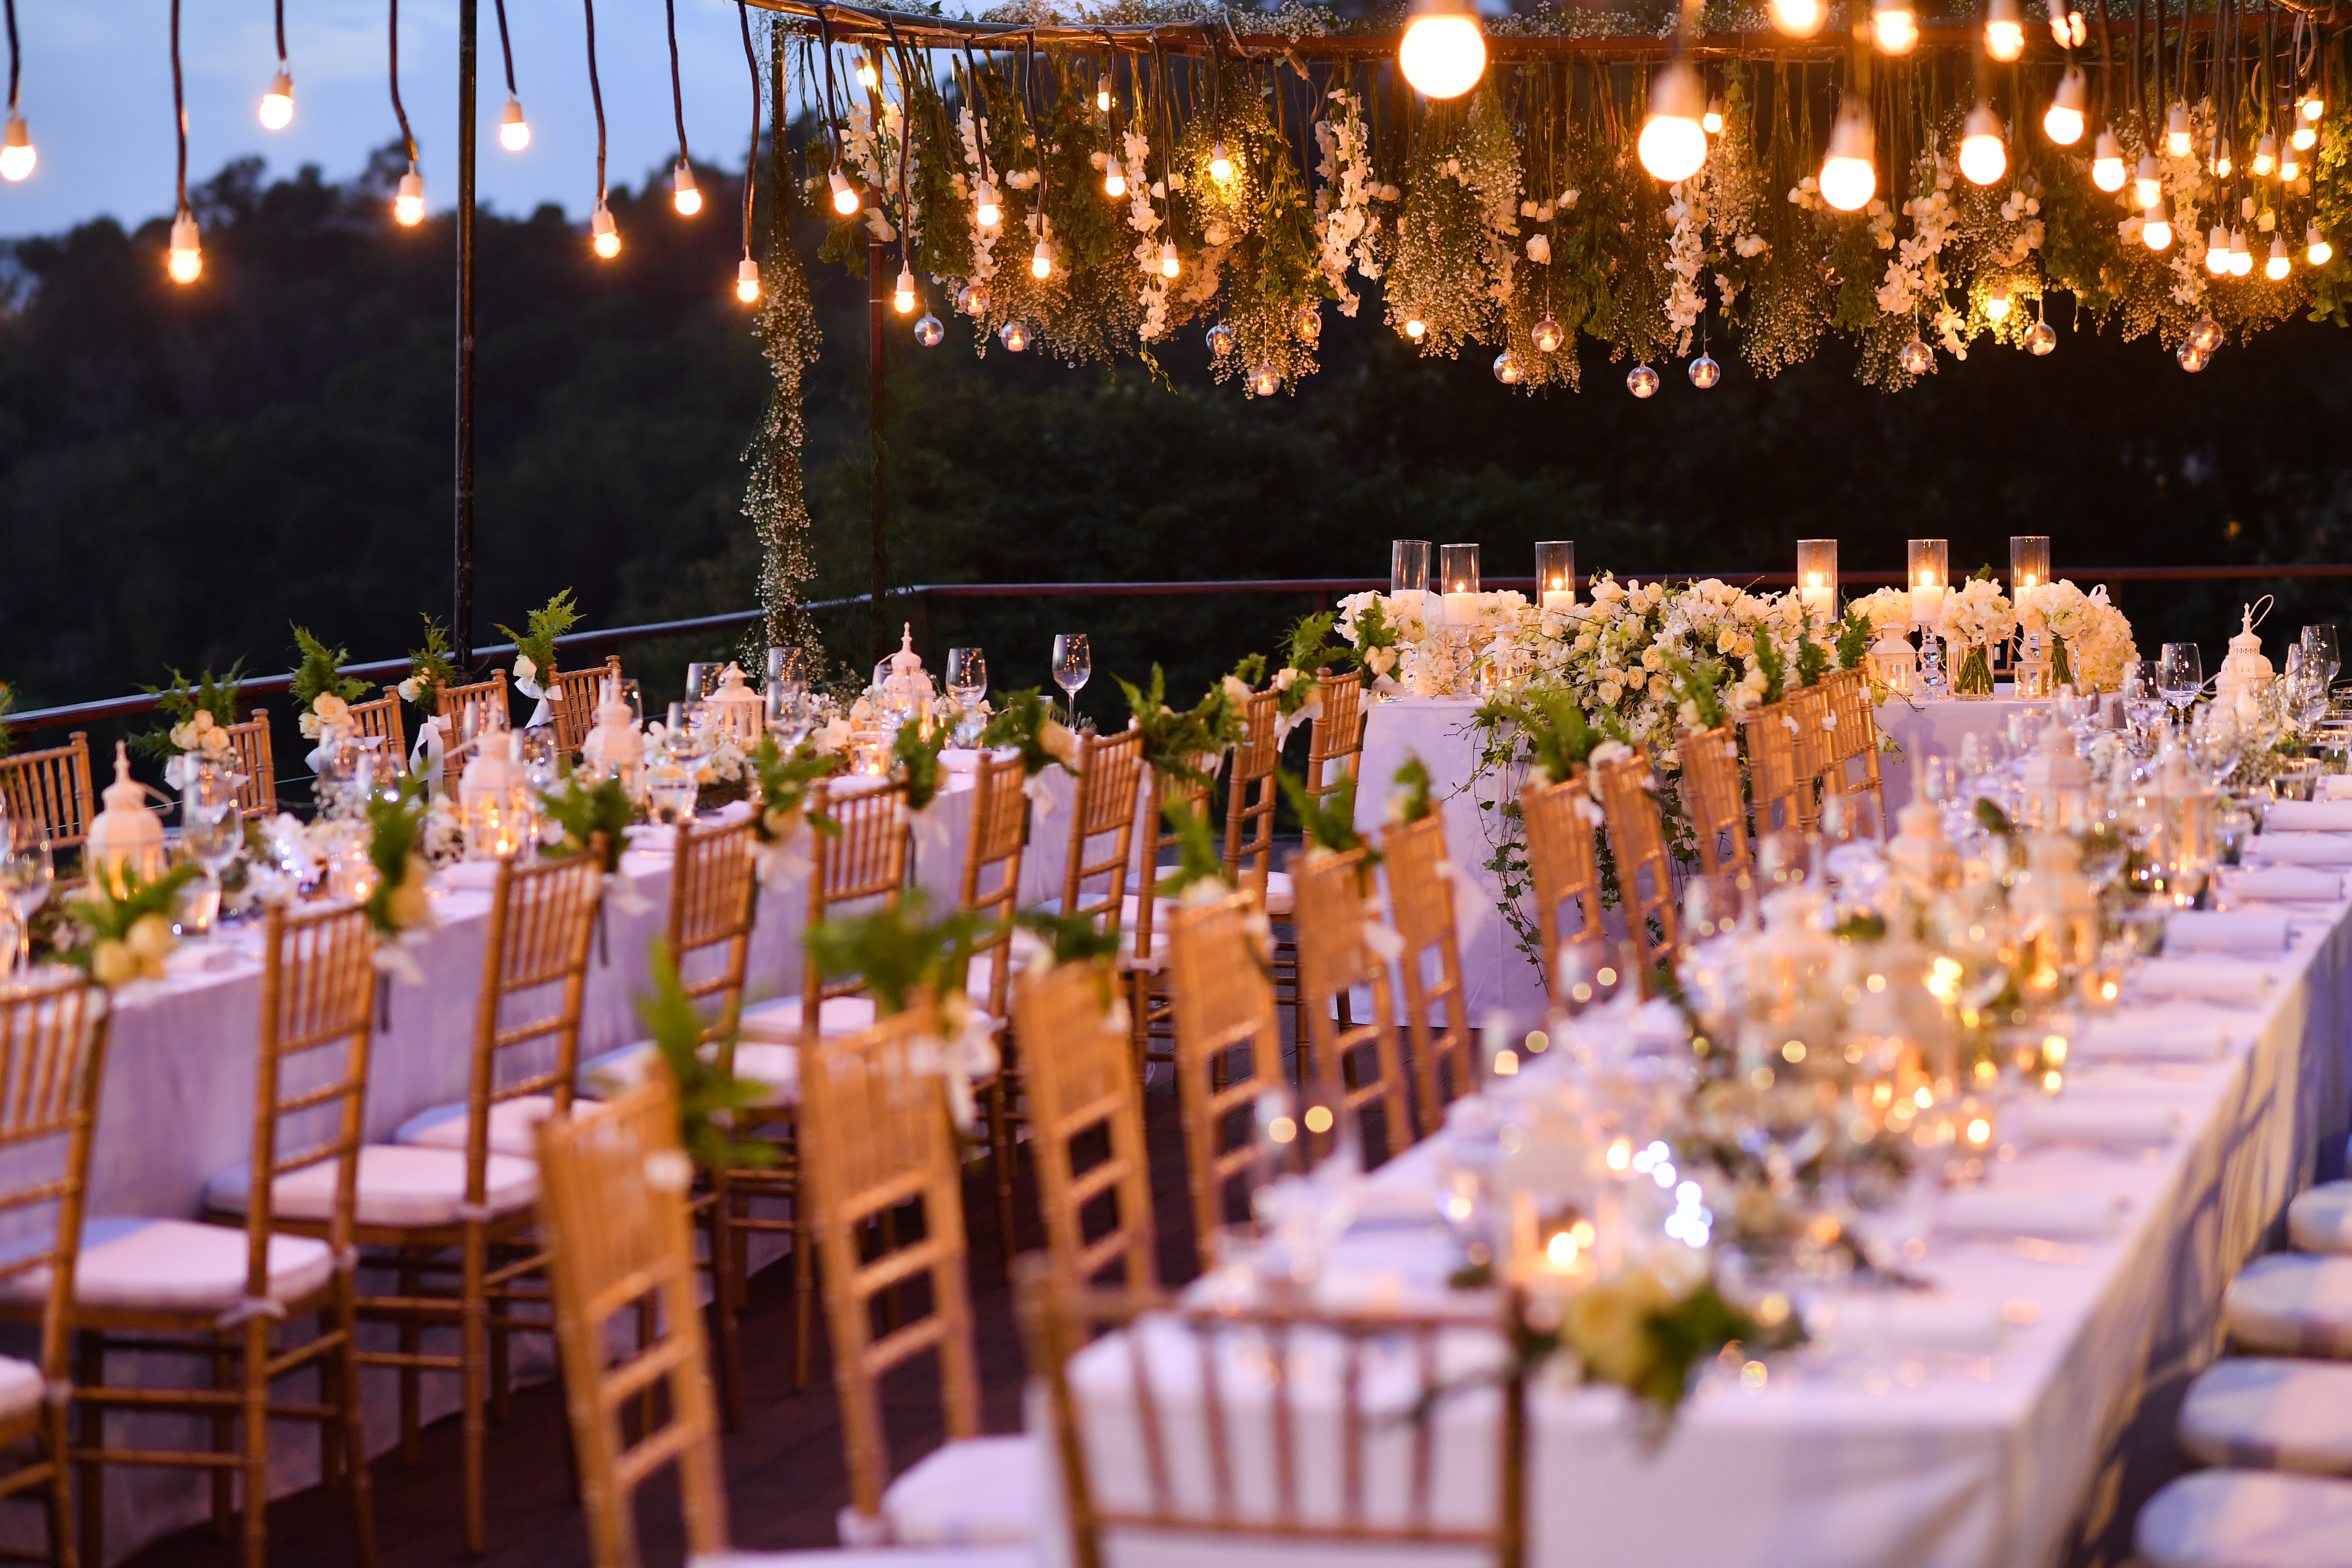 A wedding reception set with dinner tables and flowers | Source: Shutterstock